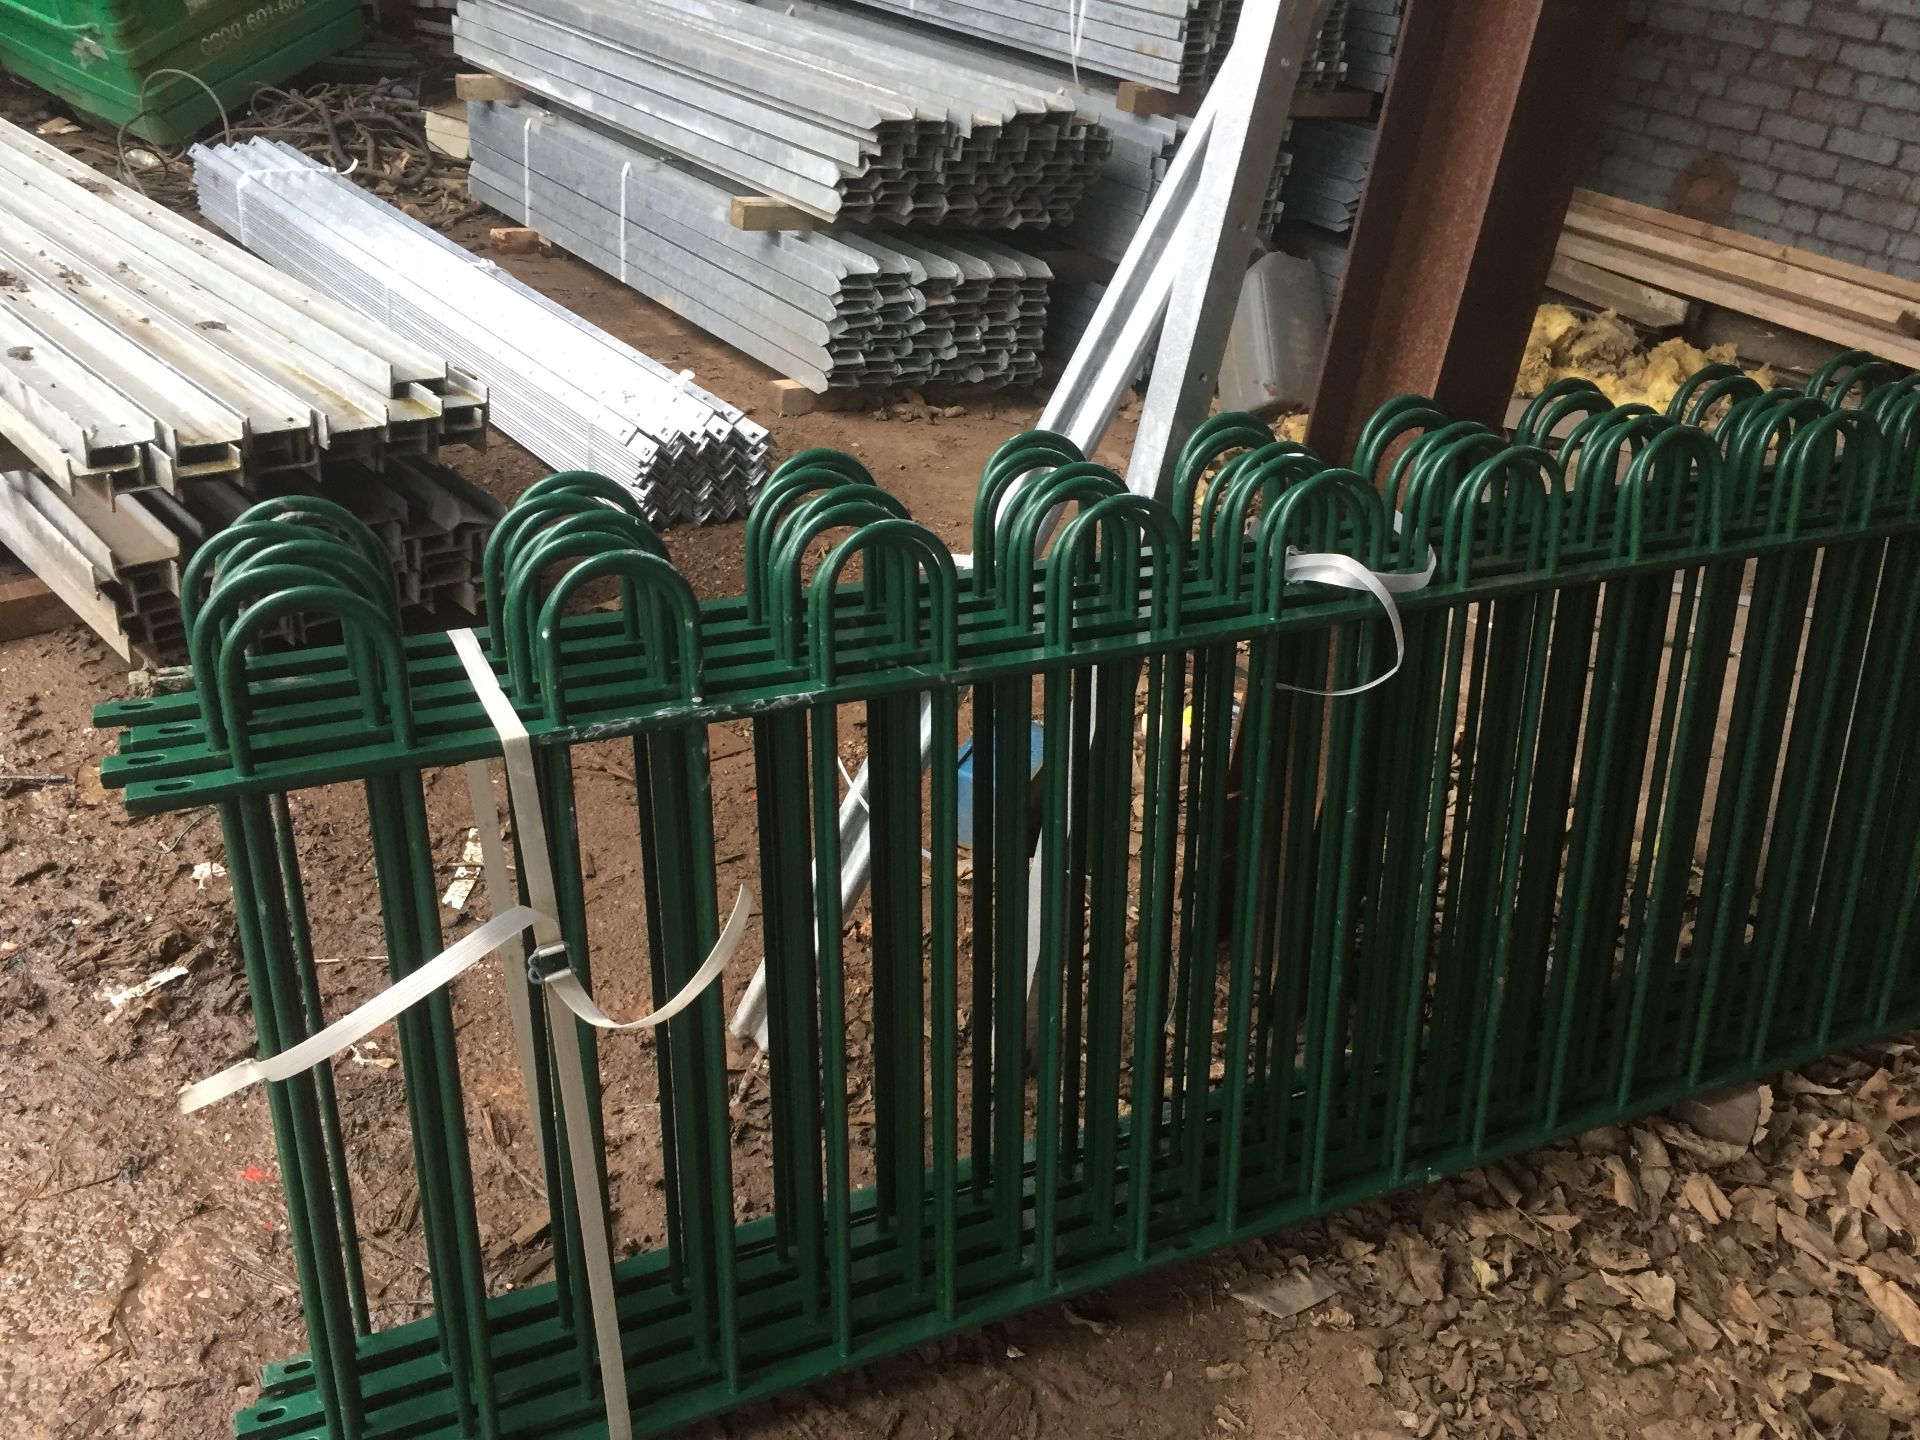 10 x New Green Bow Top Fence Panels - Image 2 of 2